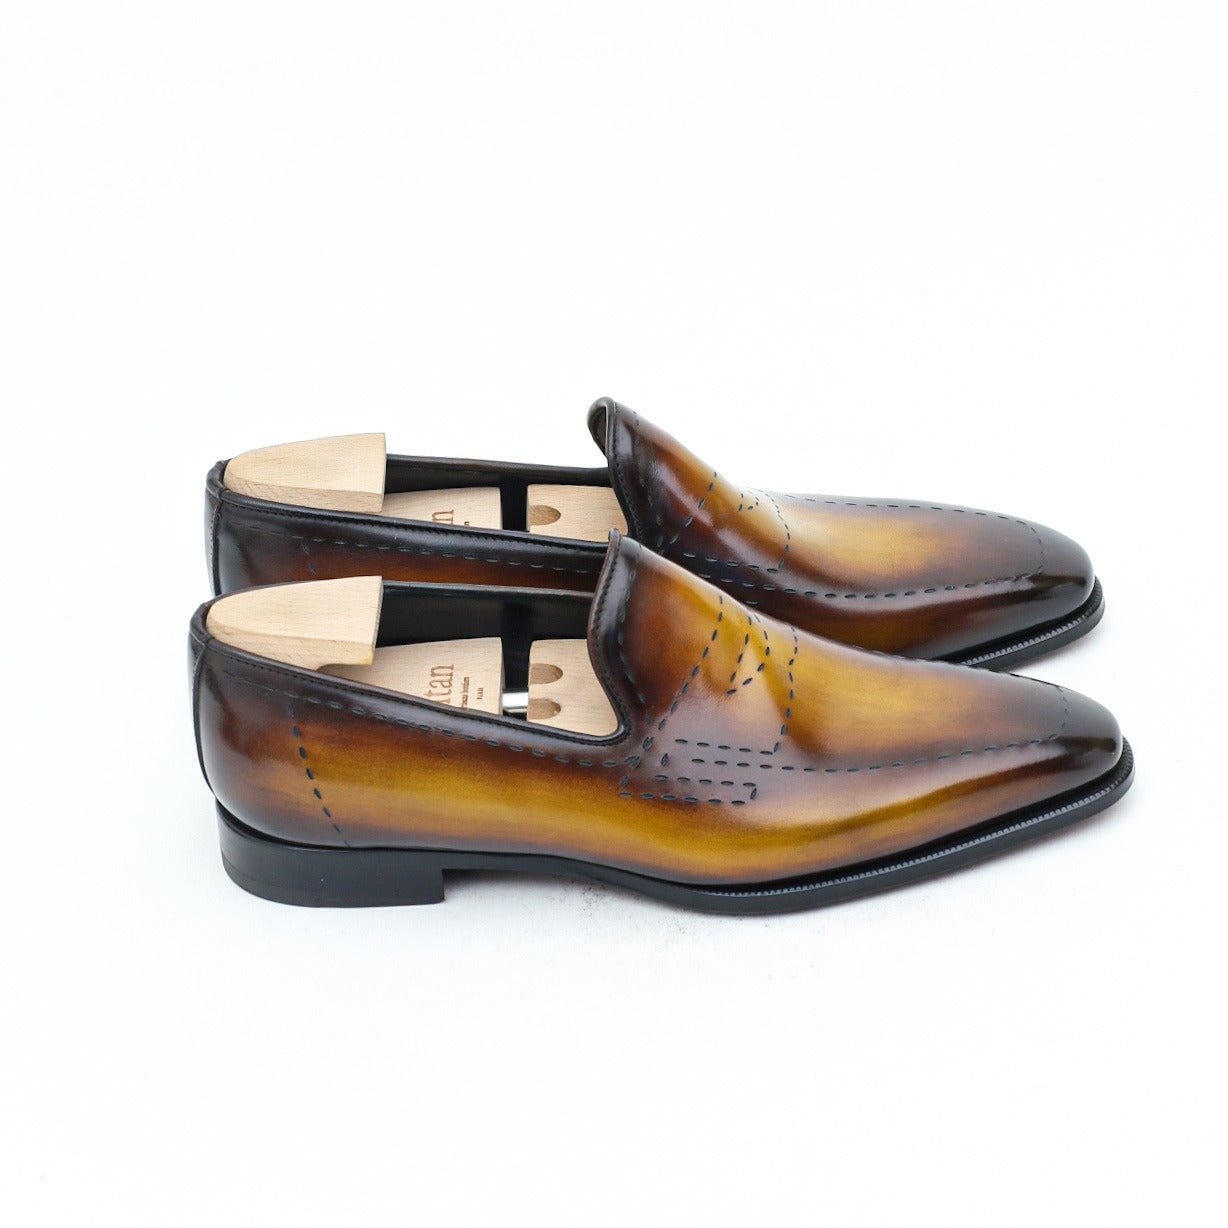 Wholecut Loafer and laser pattern